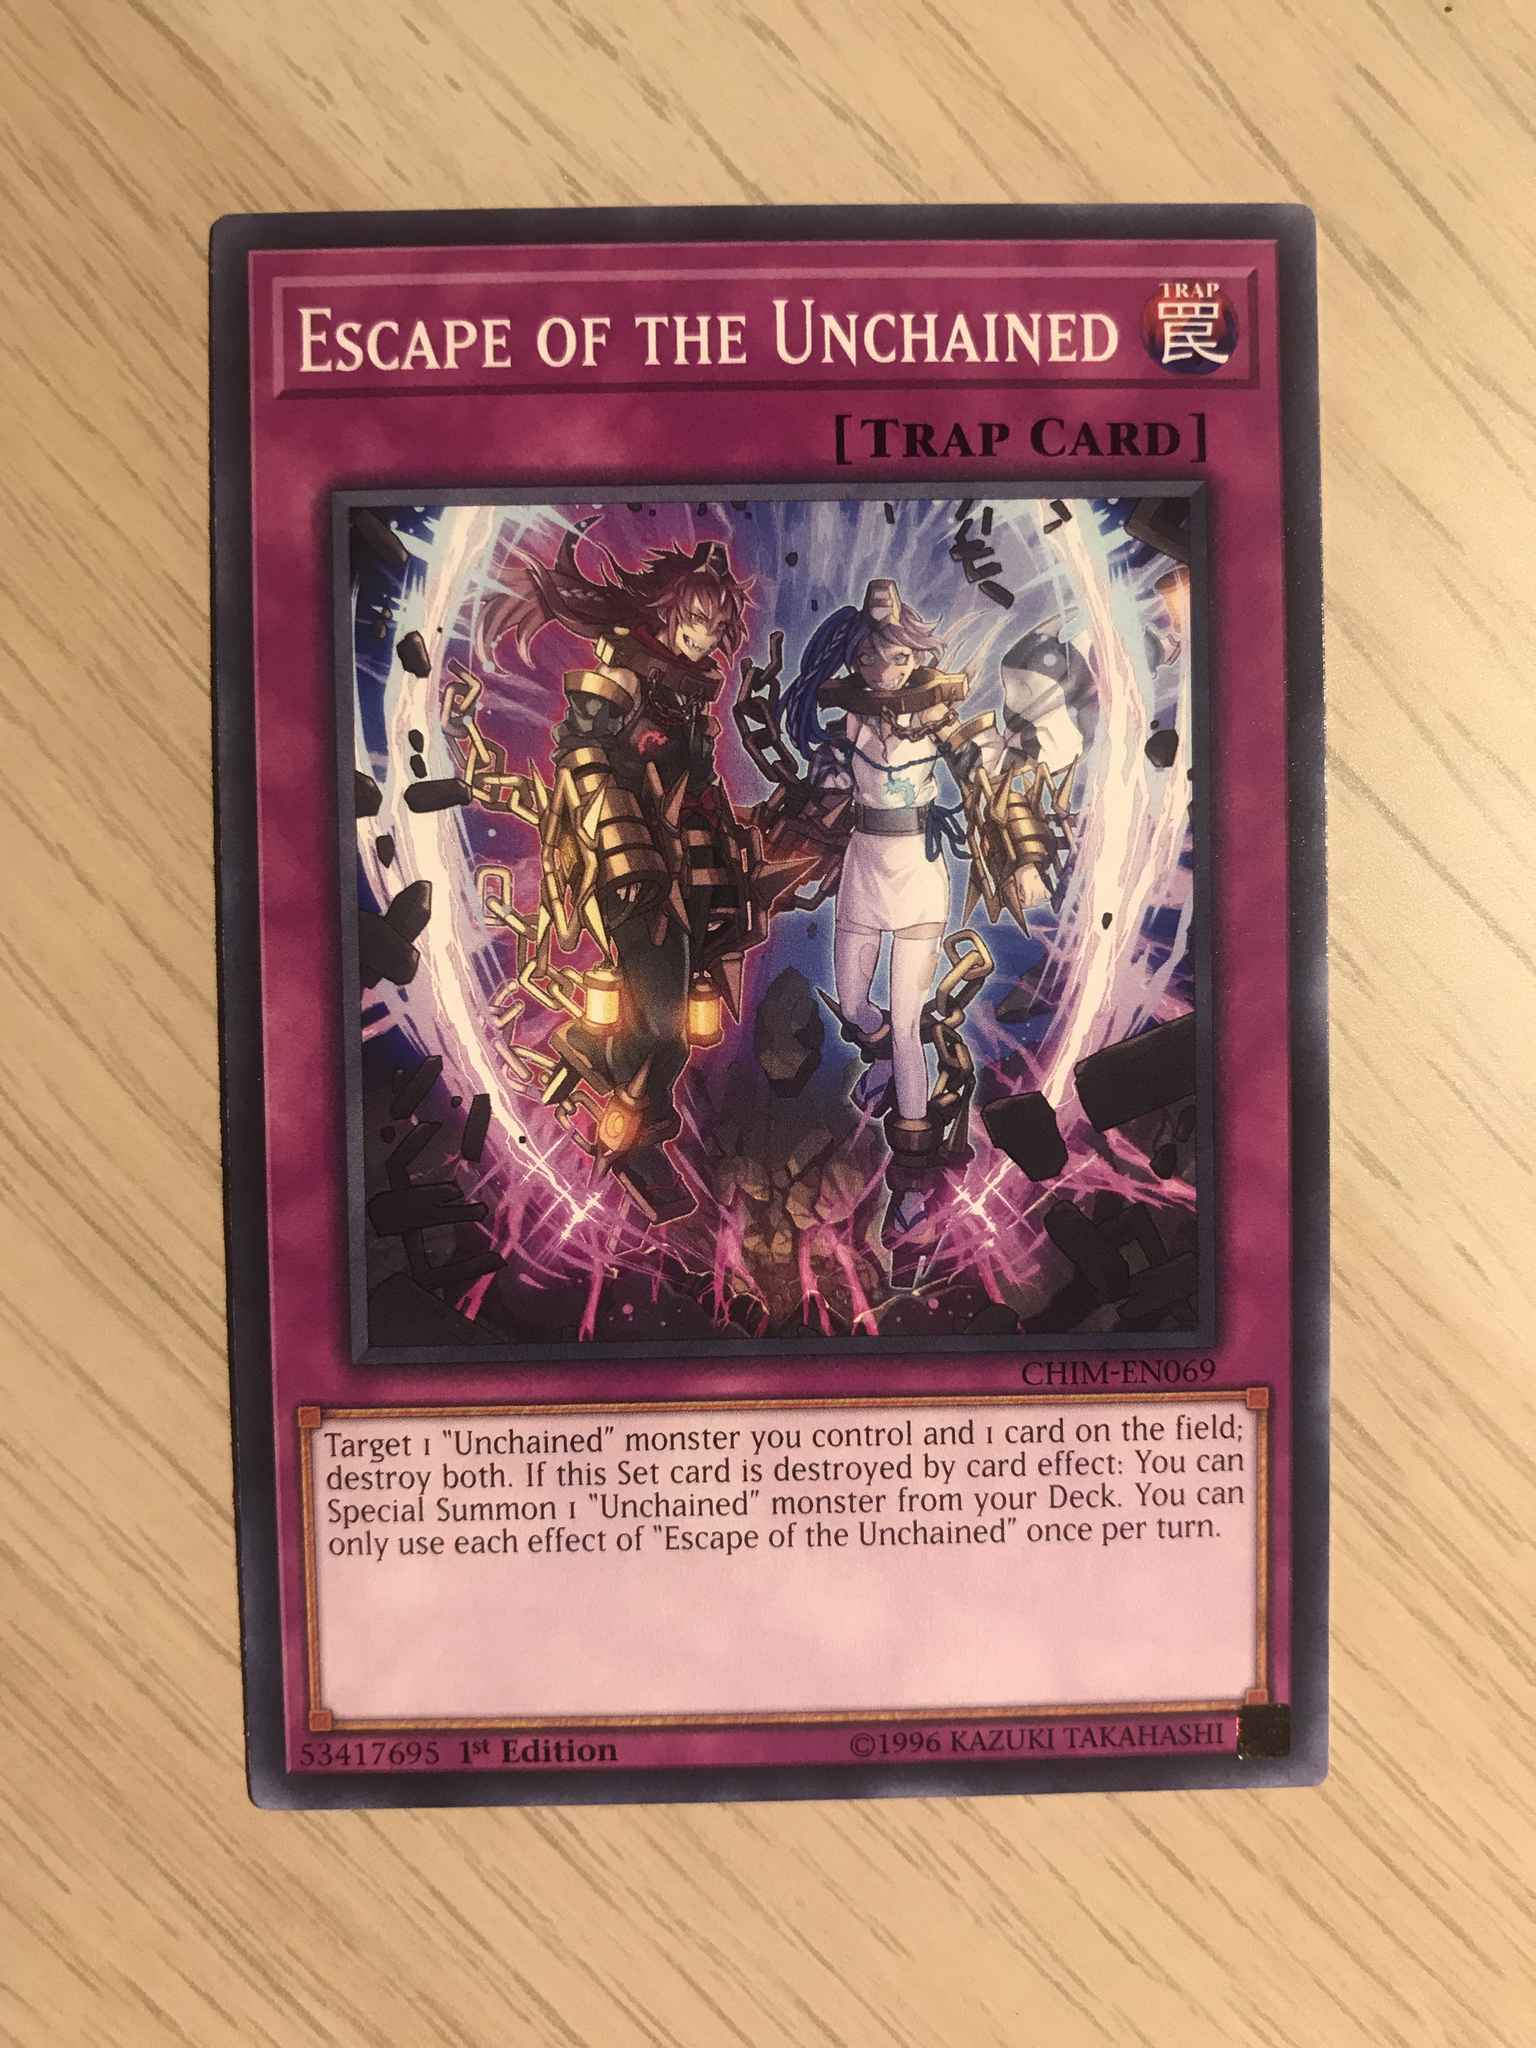 Escape of the Unchained 1st Edition CHIM-EN069 Yugioh